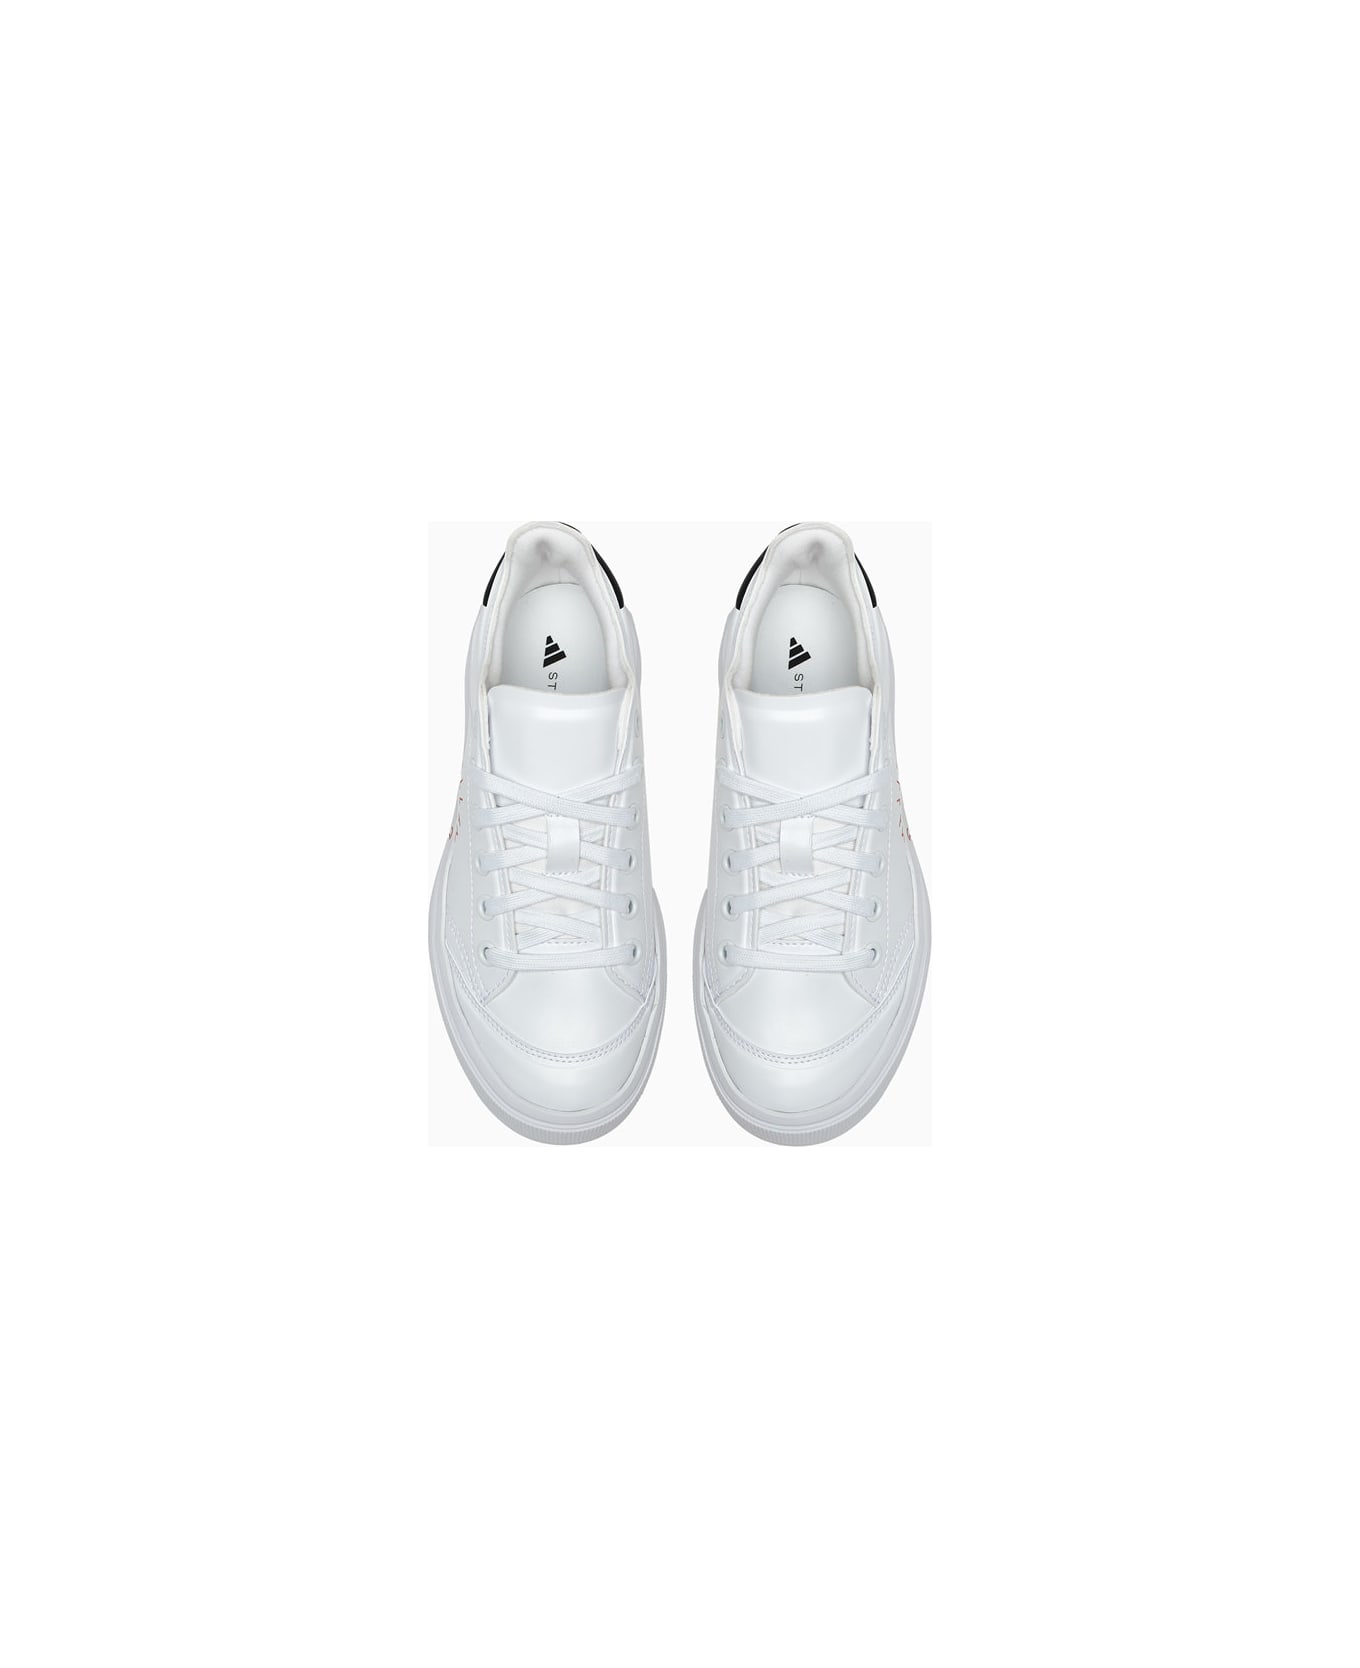 Adidas by Stella McCartney Court Bio Synth Sneakers Hq1056 - White スニーカー